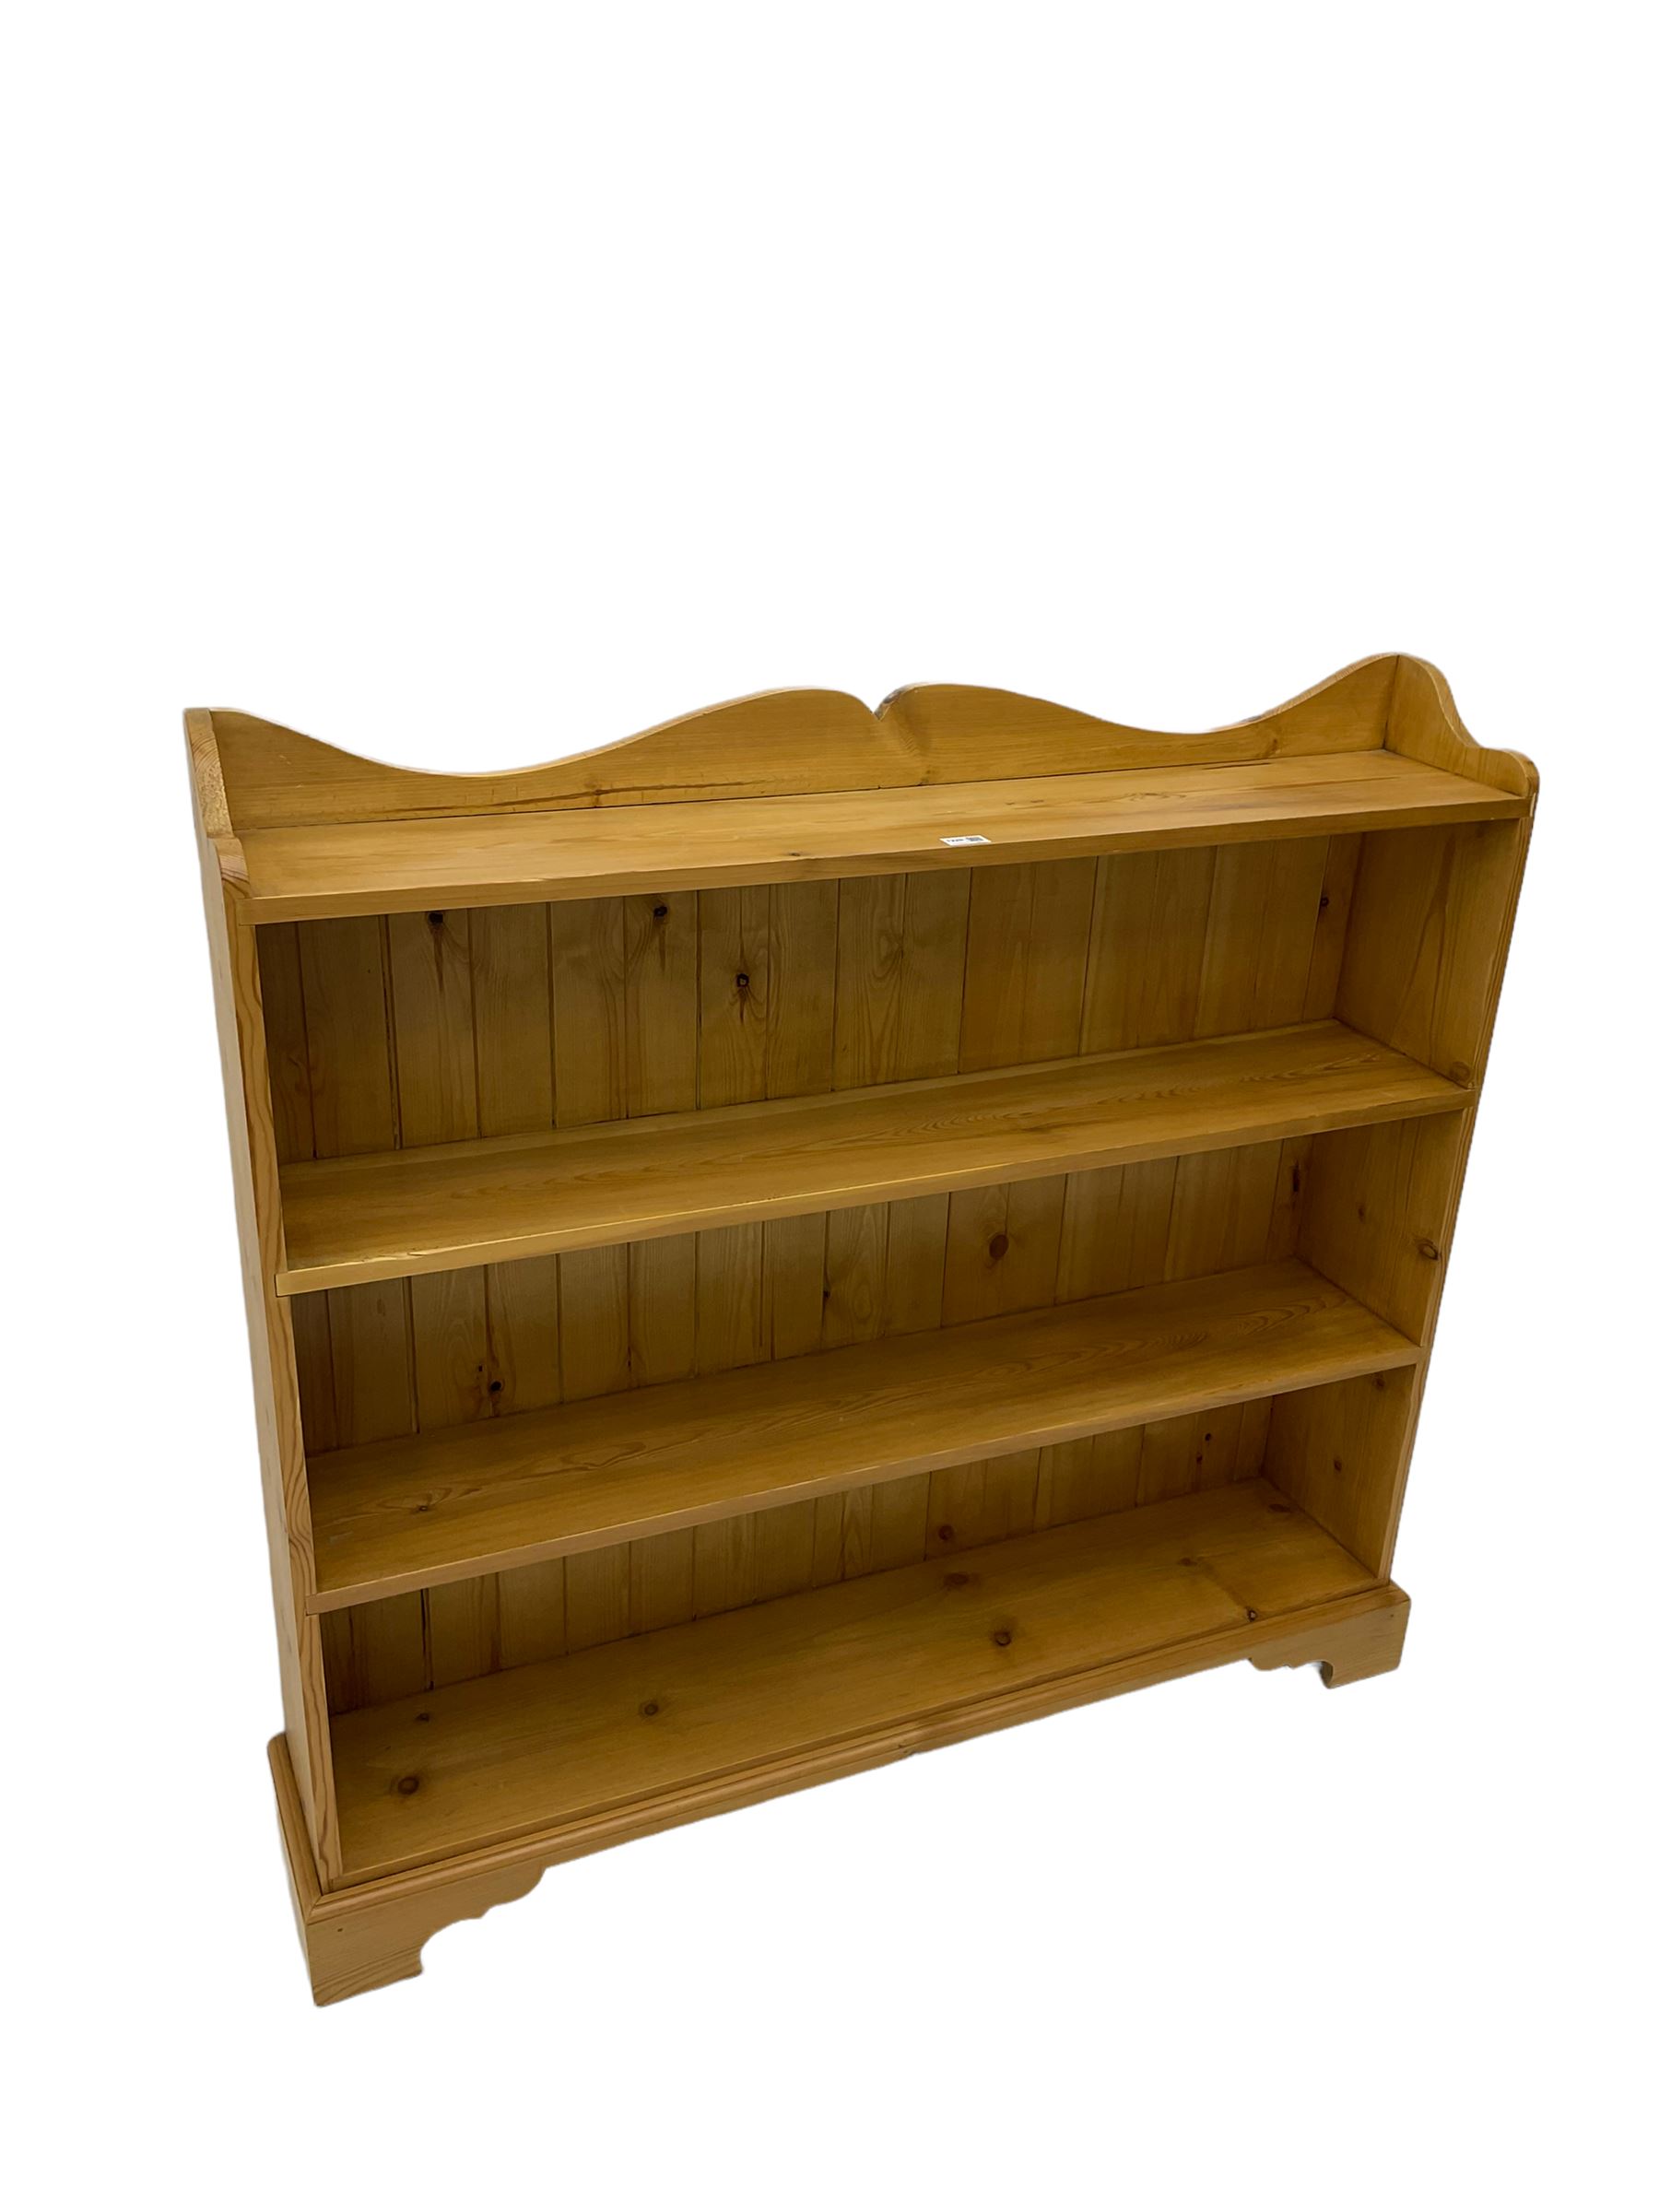 Waxed pine bookcase - Image 5 of 6